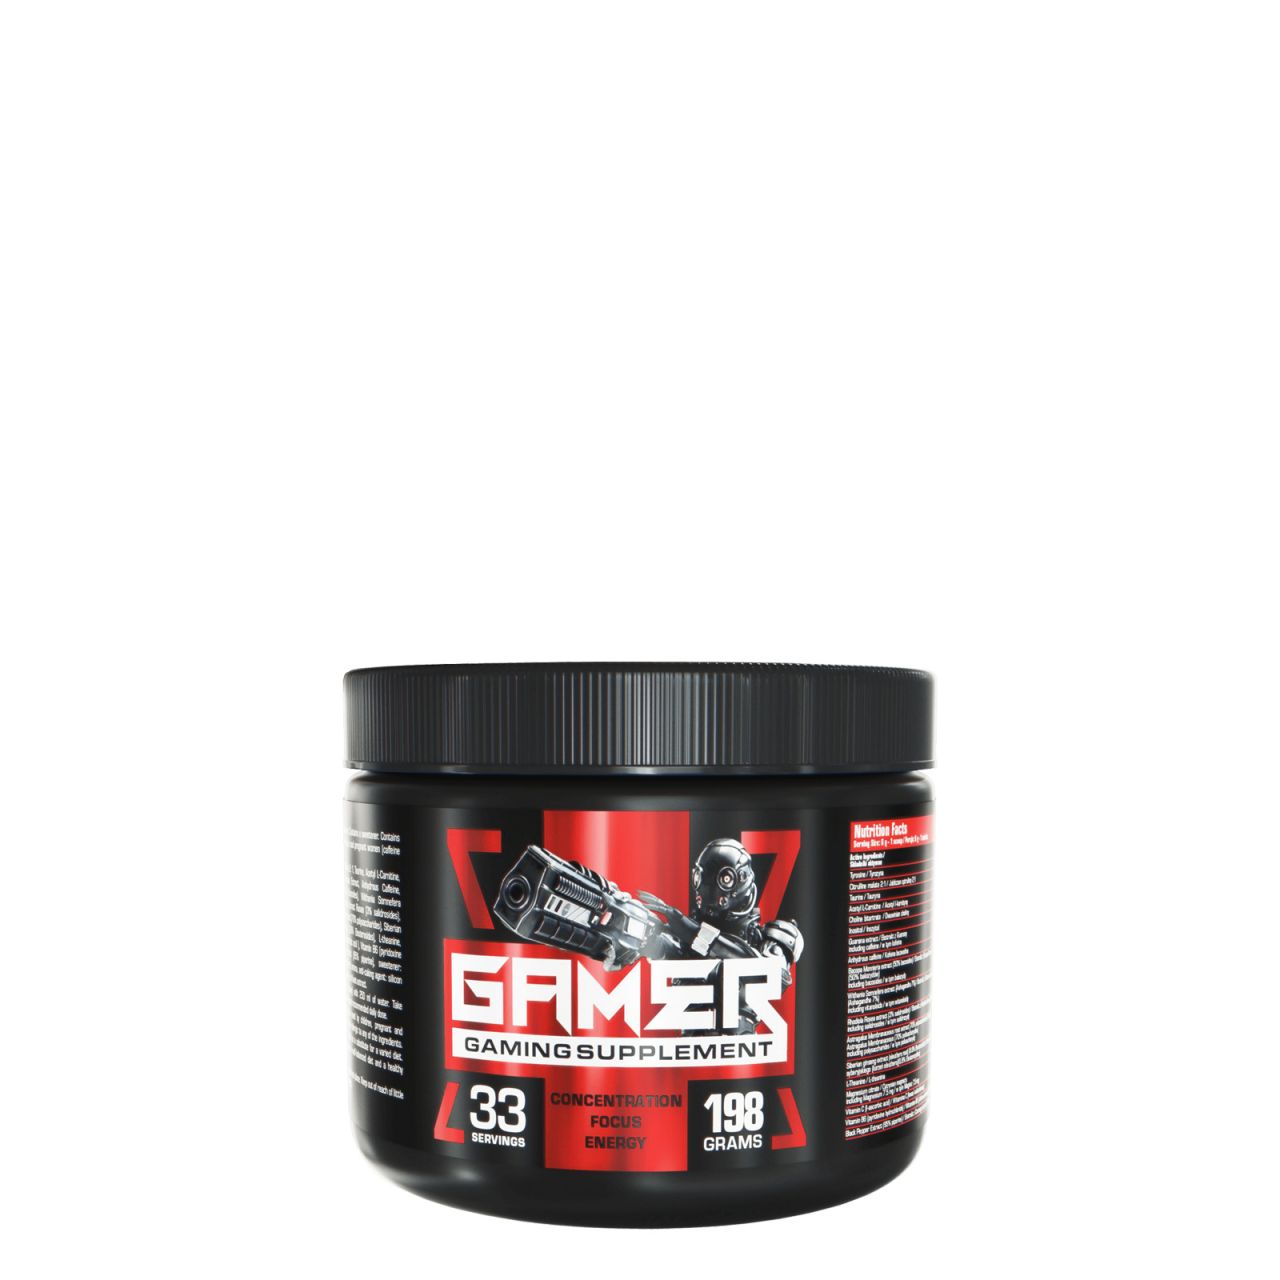 7 NUTRITION - GAMER - CONCENTRATION, FOCUS, ENERGY - 198 G